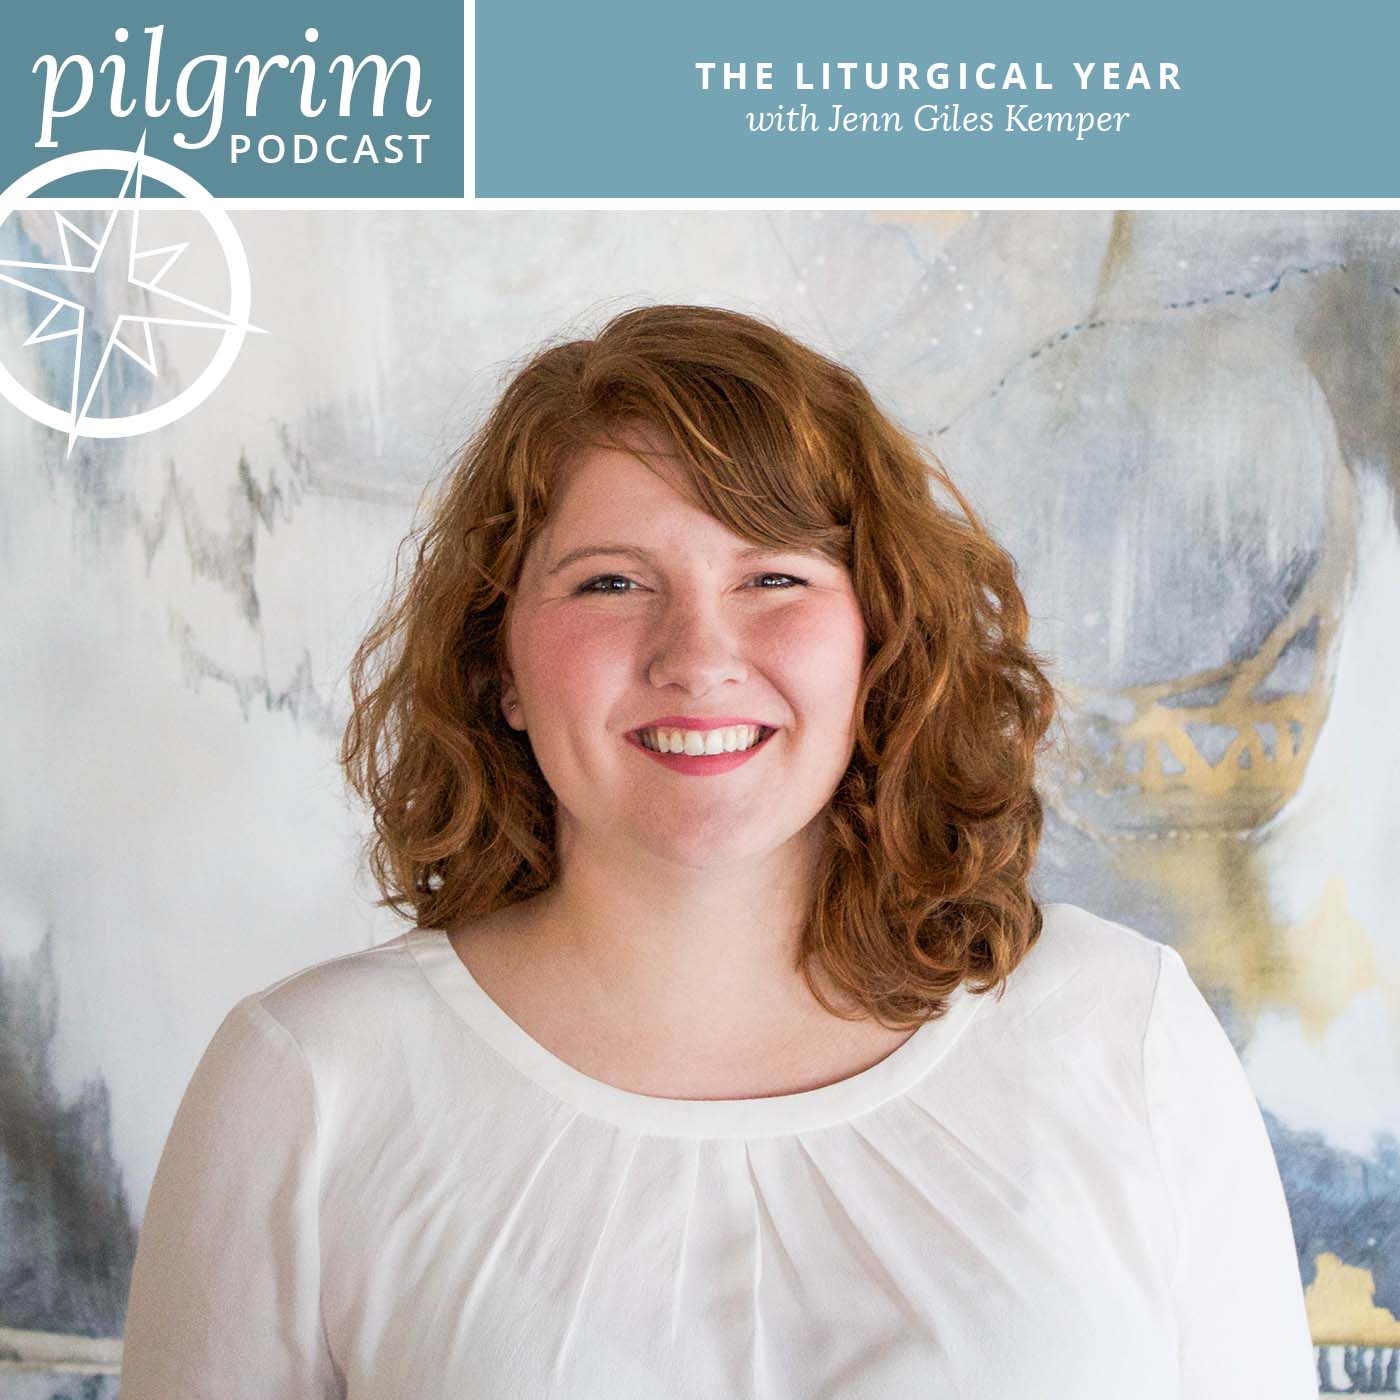 S1:E6 | The Liturgical Year with Jenn Giles Kemper